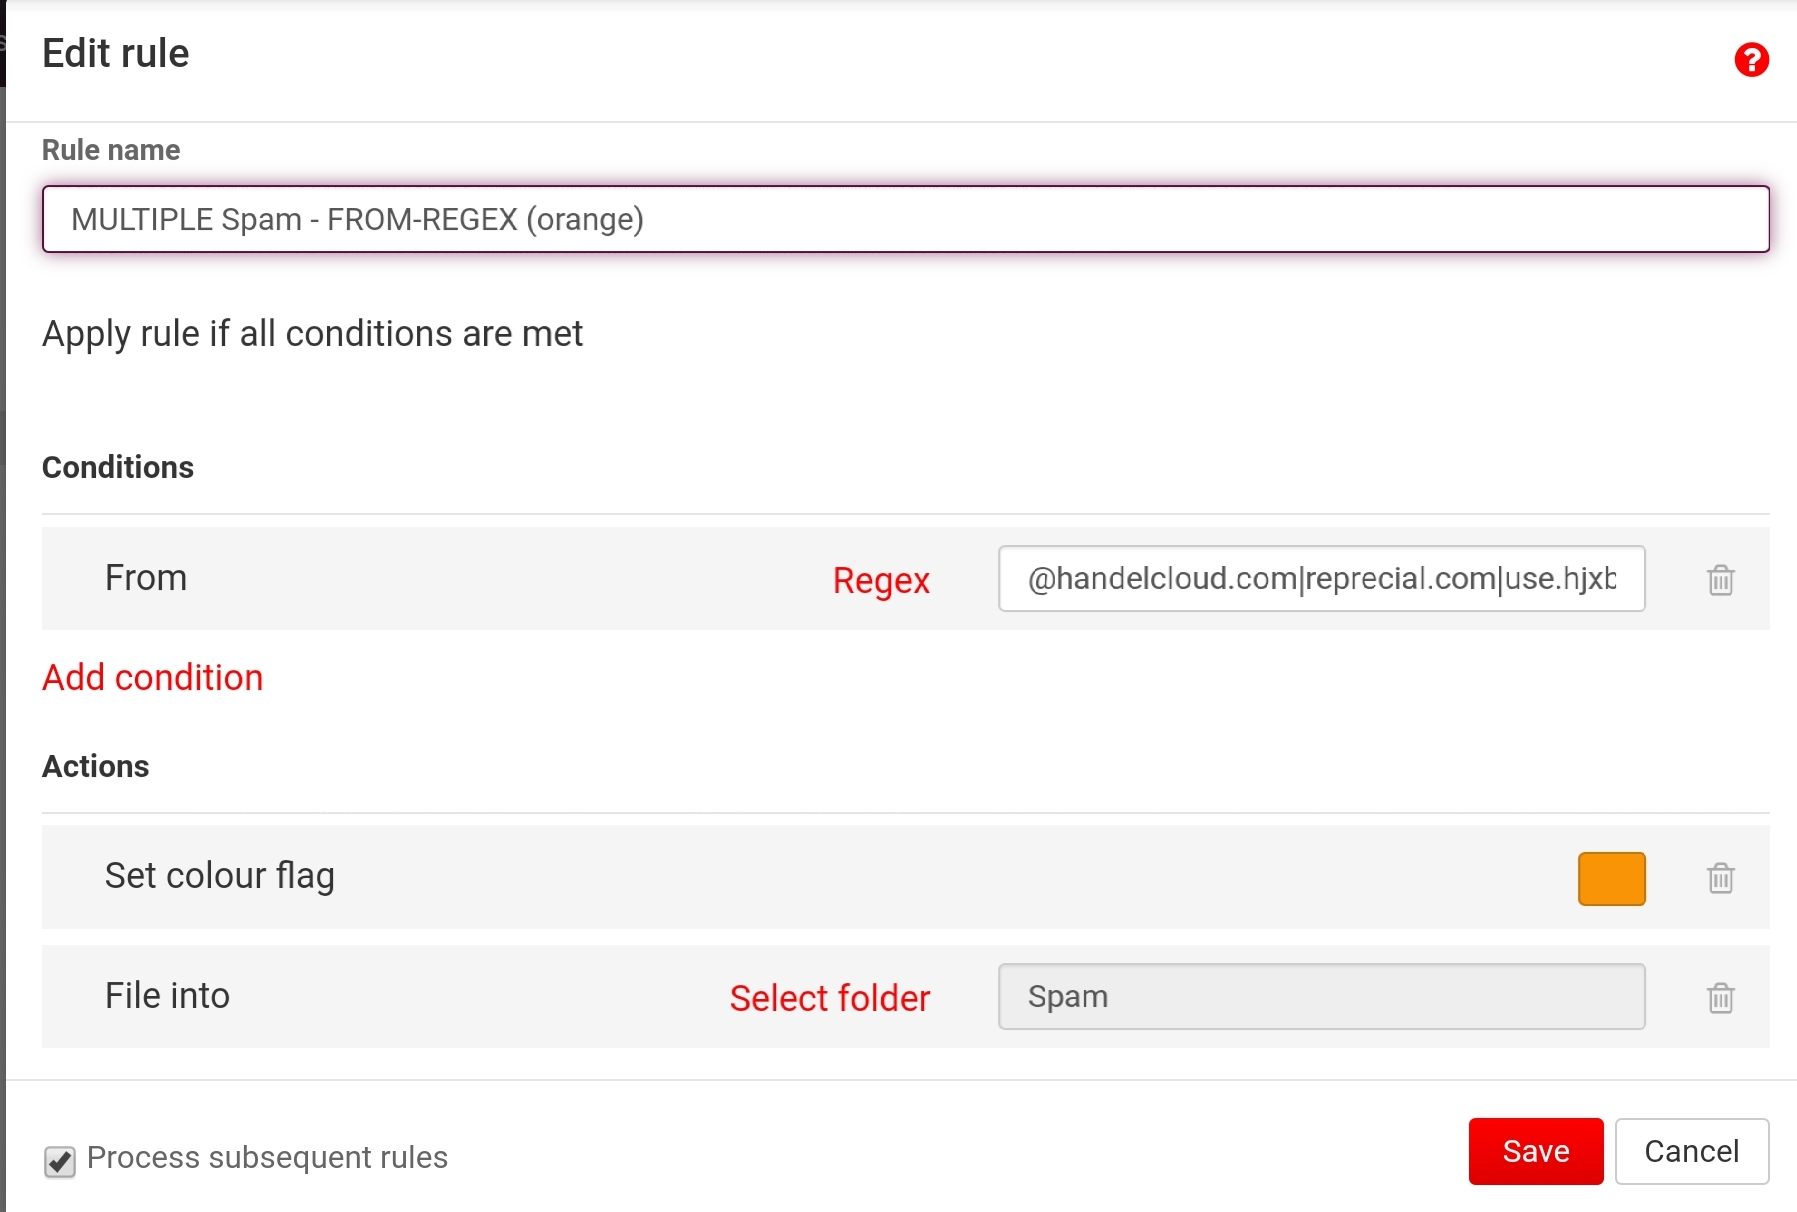 Solved: Daily Spam re Norton/Mcafee - Page 5 - Virgin Media Community -  4501578